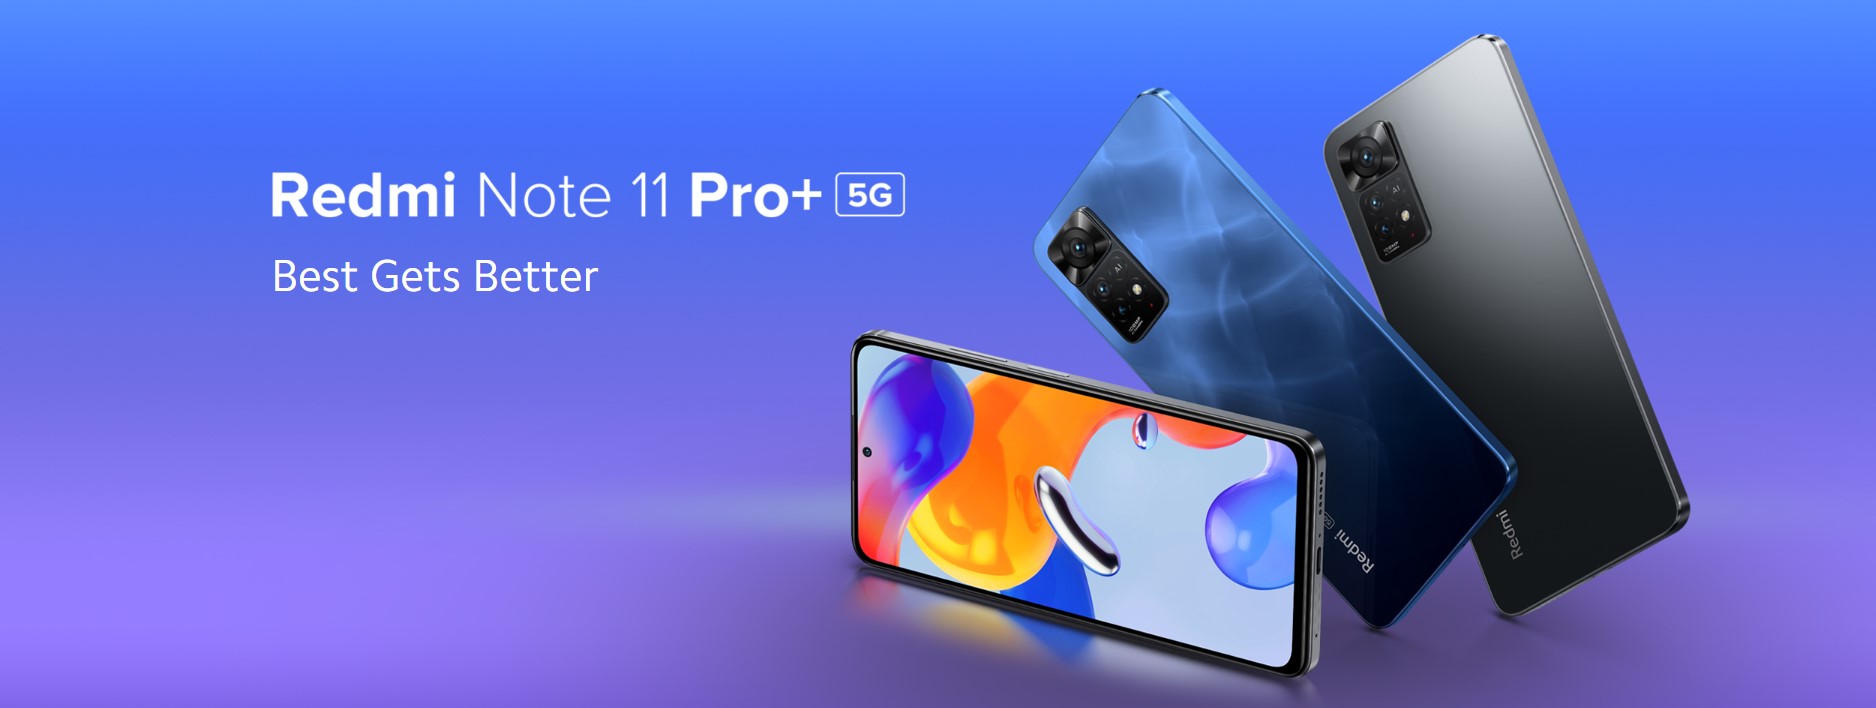 Redmi Note 11 Pro+ 5G - the best buy 5g mobile in 2022 under 25000